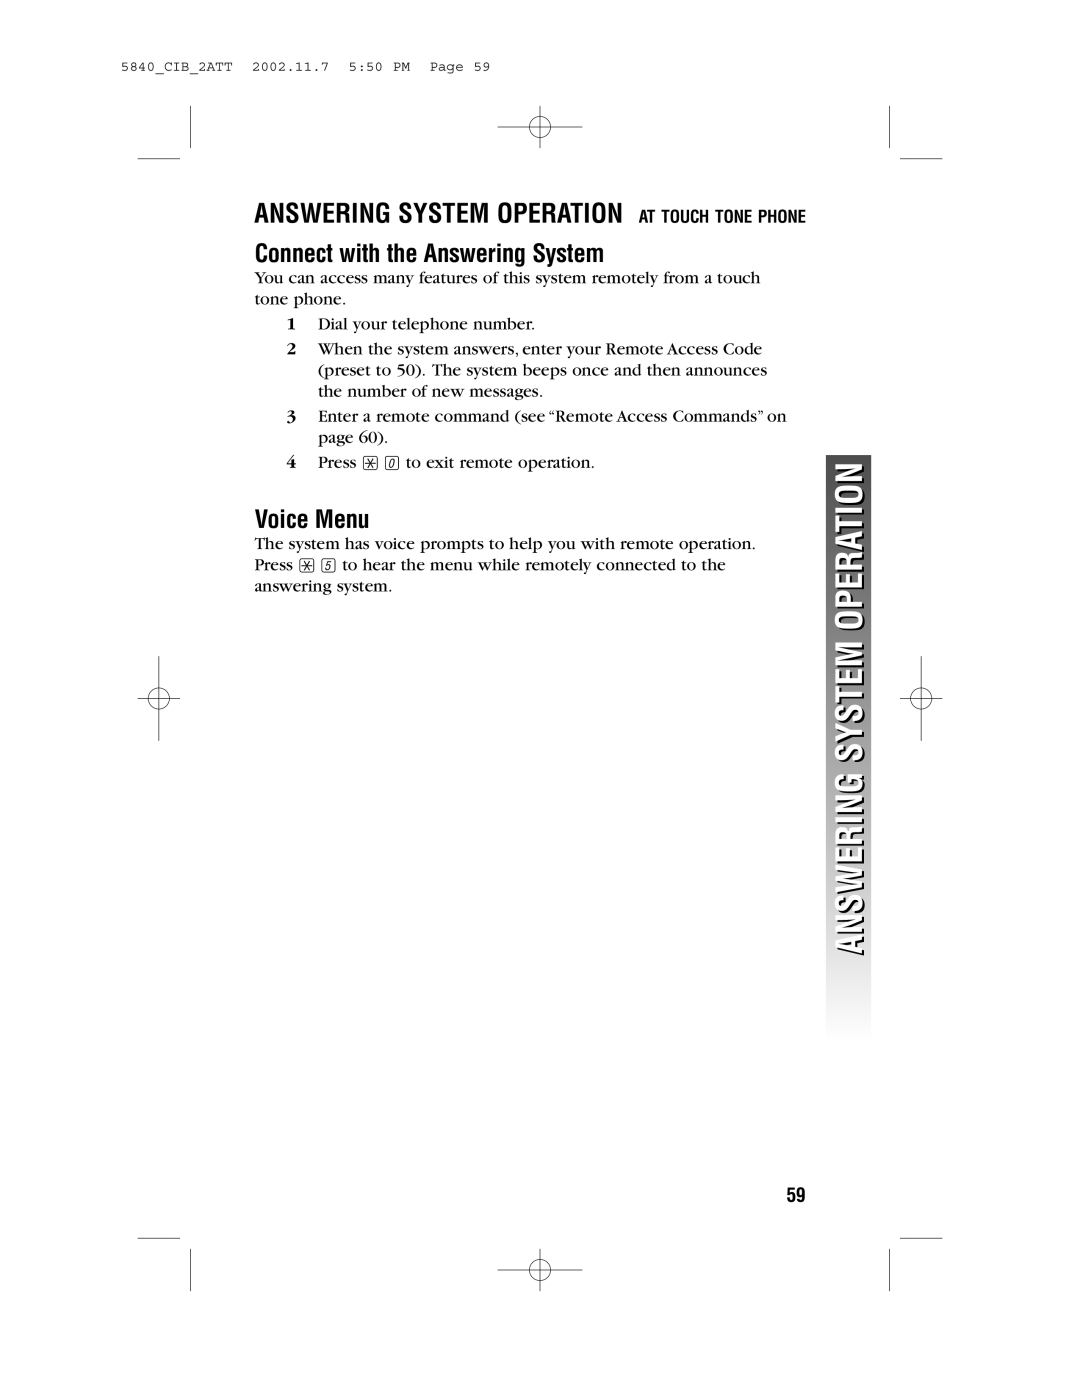 AT&T 5840 user manual Connect with the Answering System, Voice Menu, Answering System Operation At Touch Tone Phone 